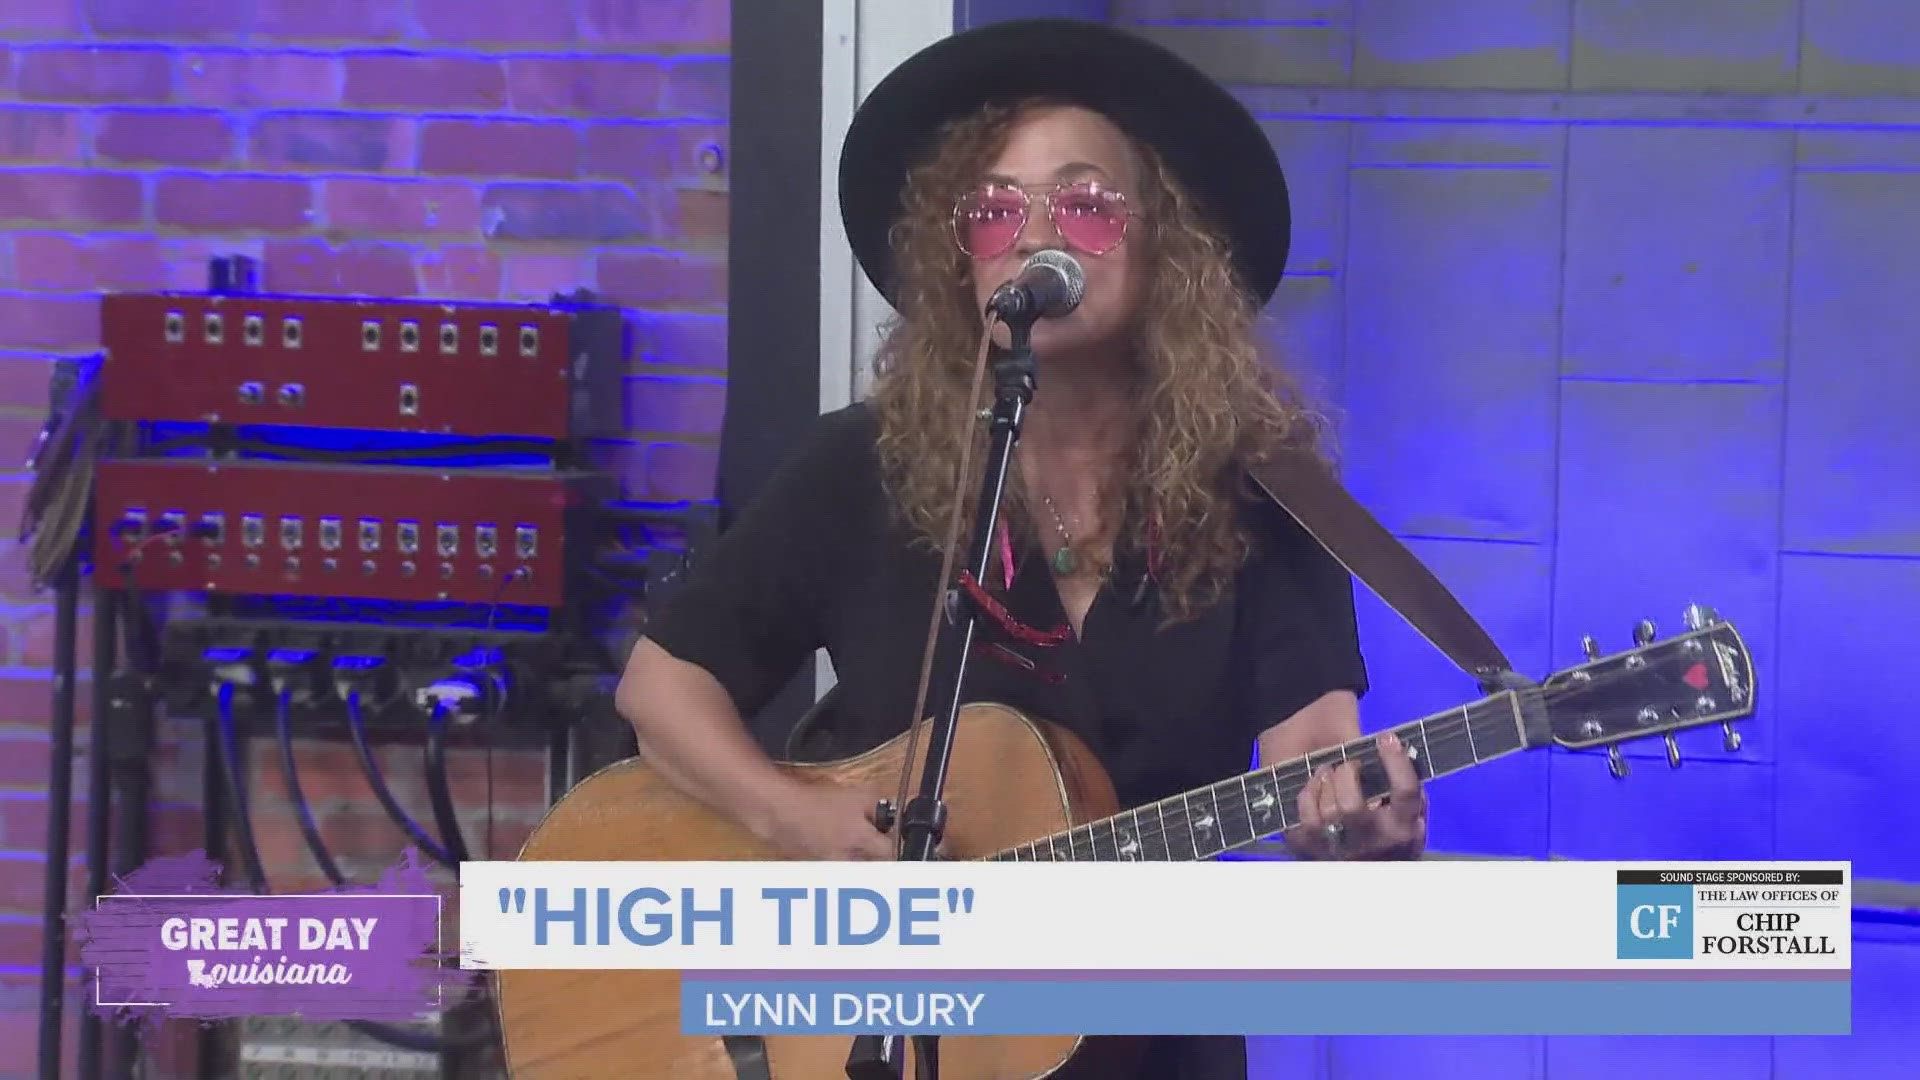 Lynn Drury is in our Chip Forstall Sound Stage to share a song from her newest album.